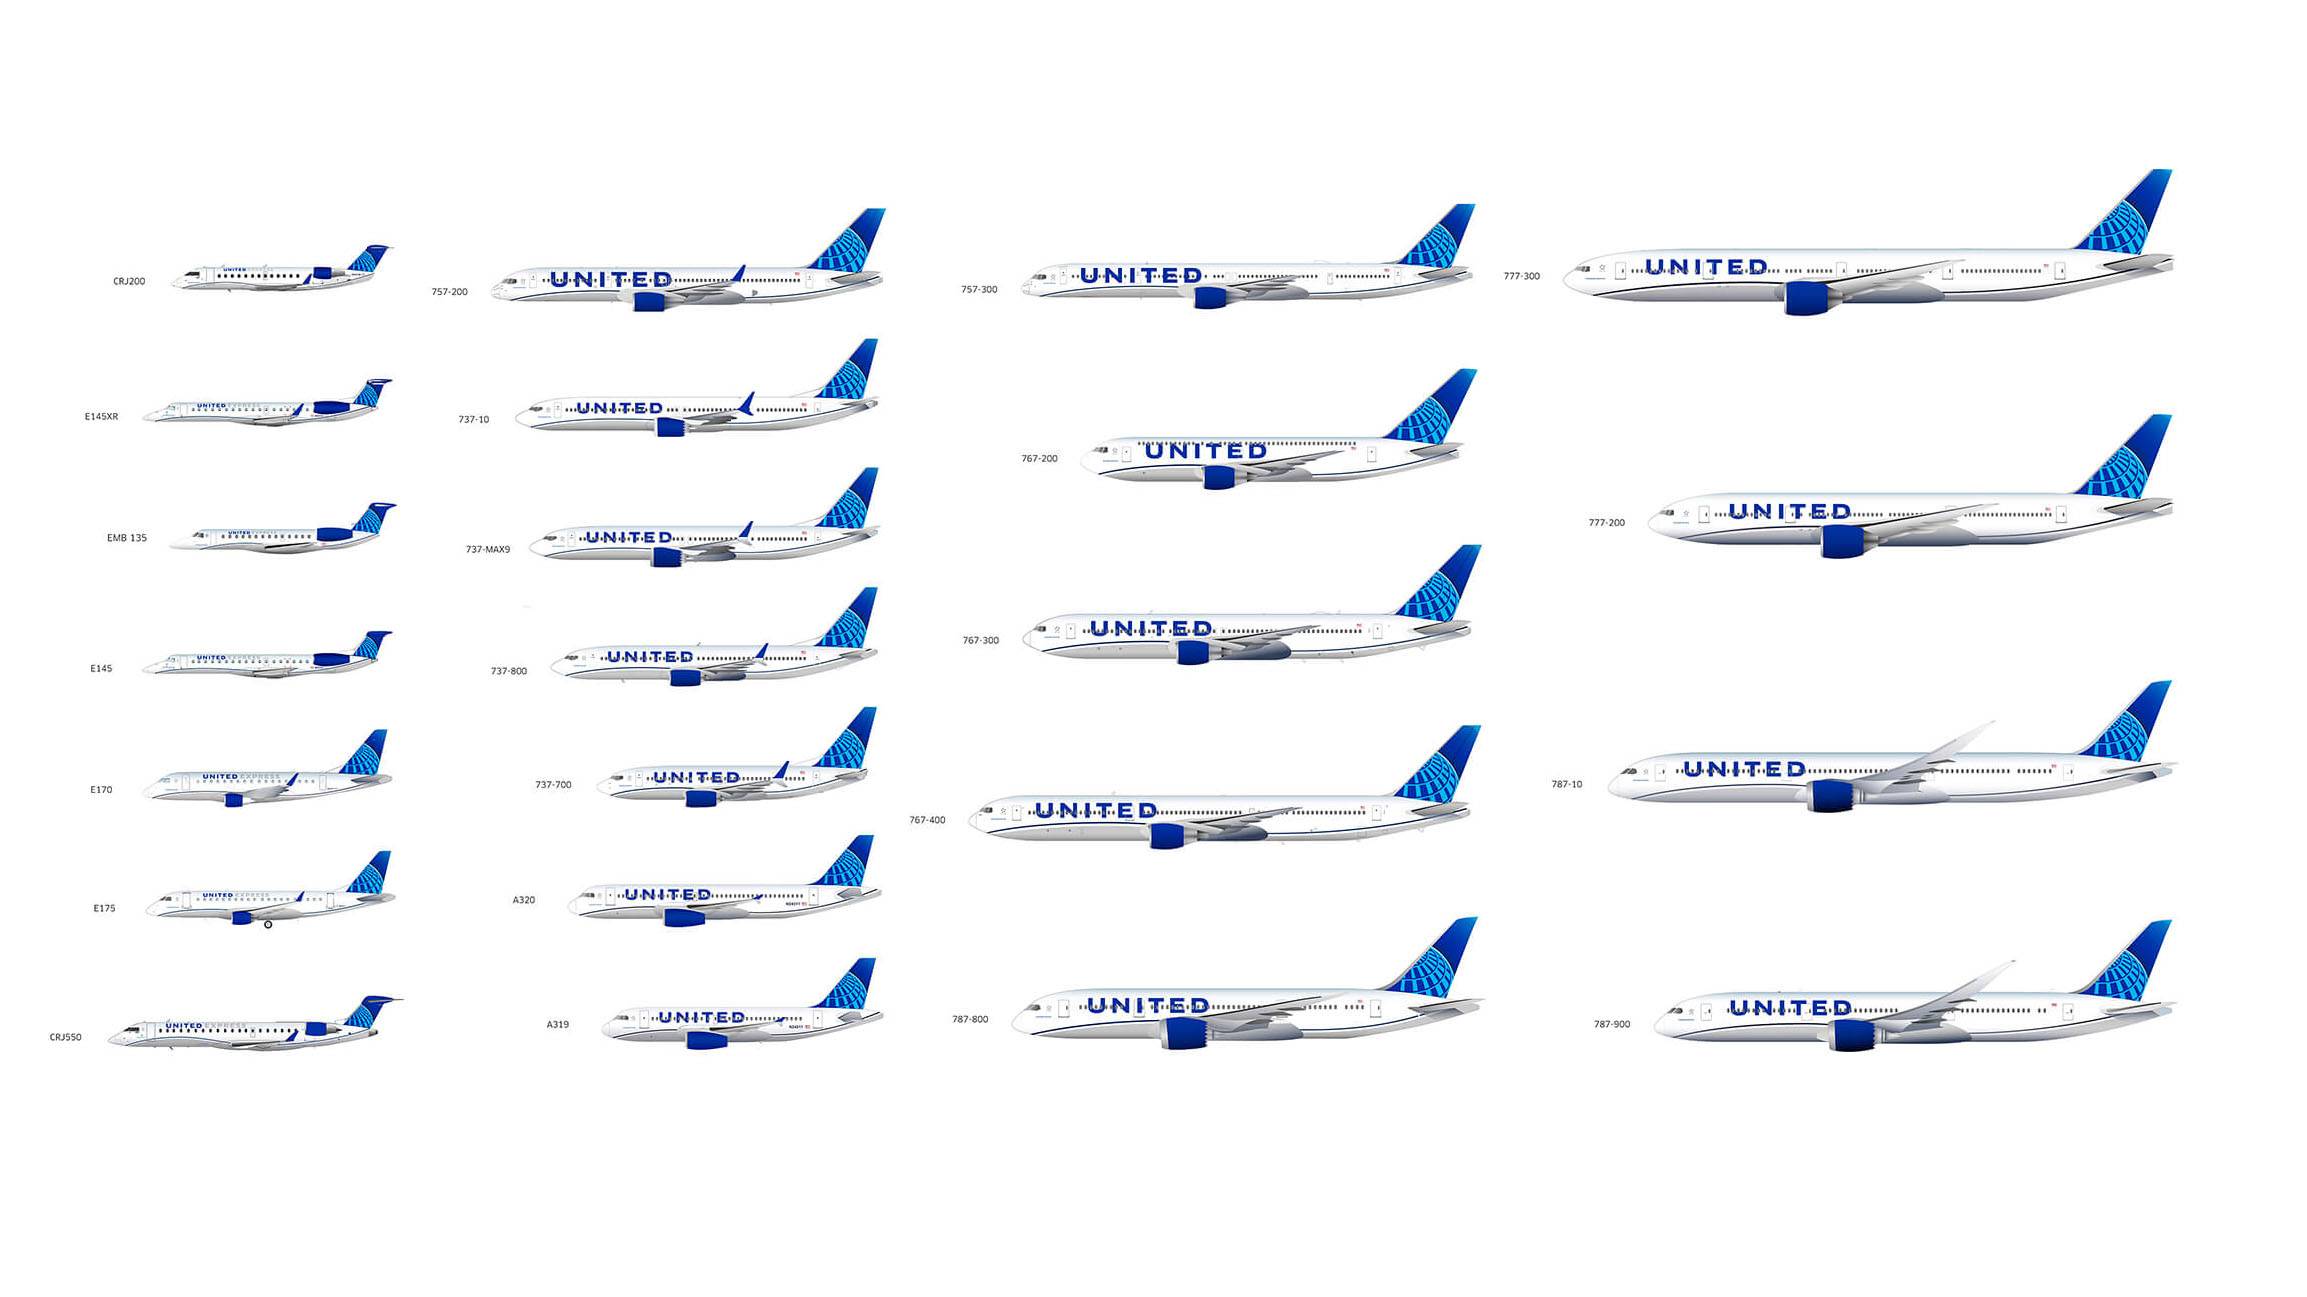 The United Airlines livery shown on a wide variety of aircraft types